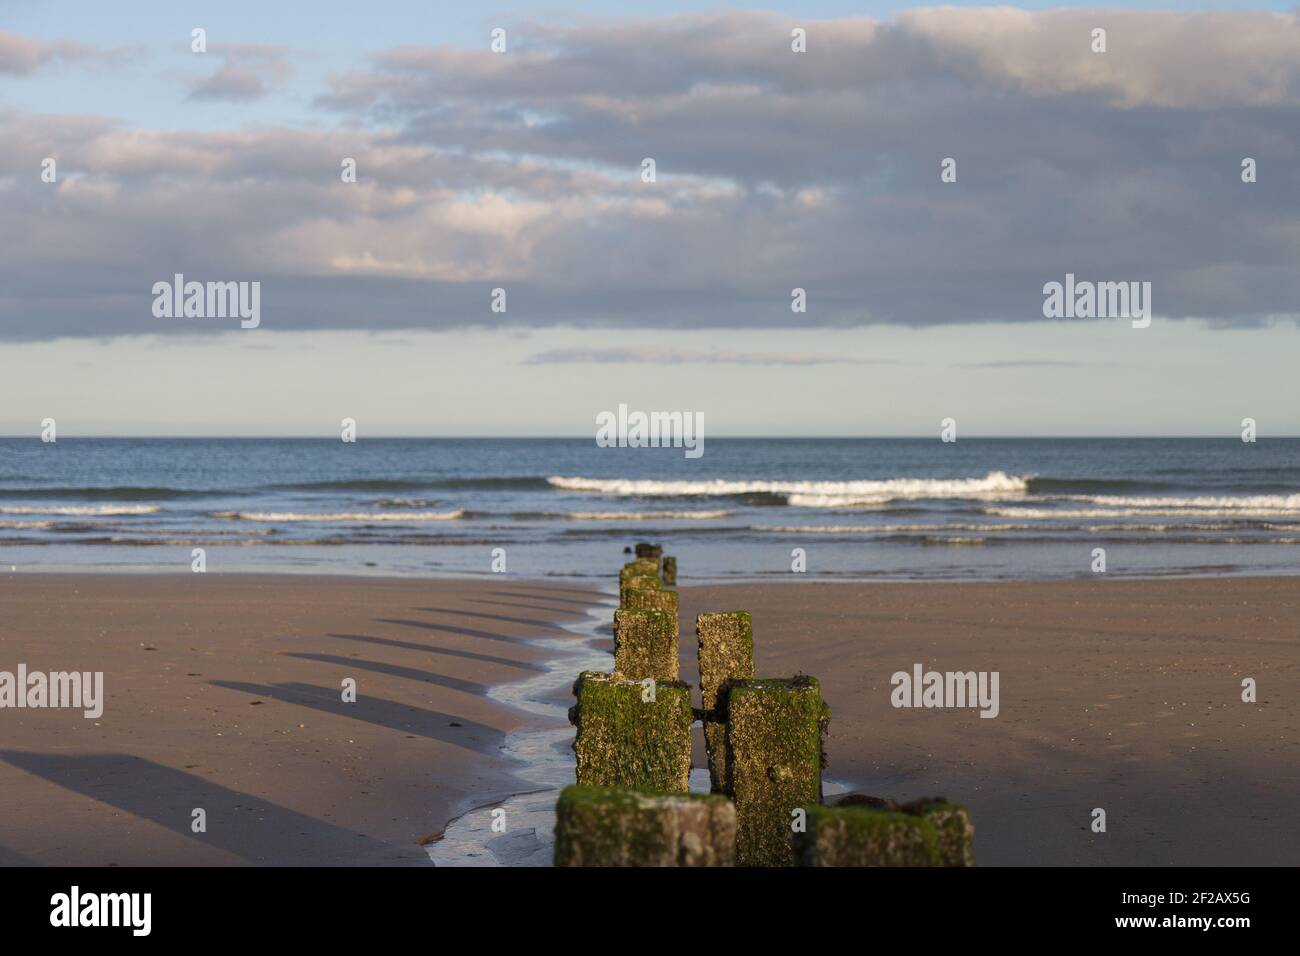 Wave Breakers on Youghal Beach, sea, wave, clouds, sandy beach, wave breaker, Stock Photo